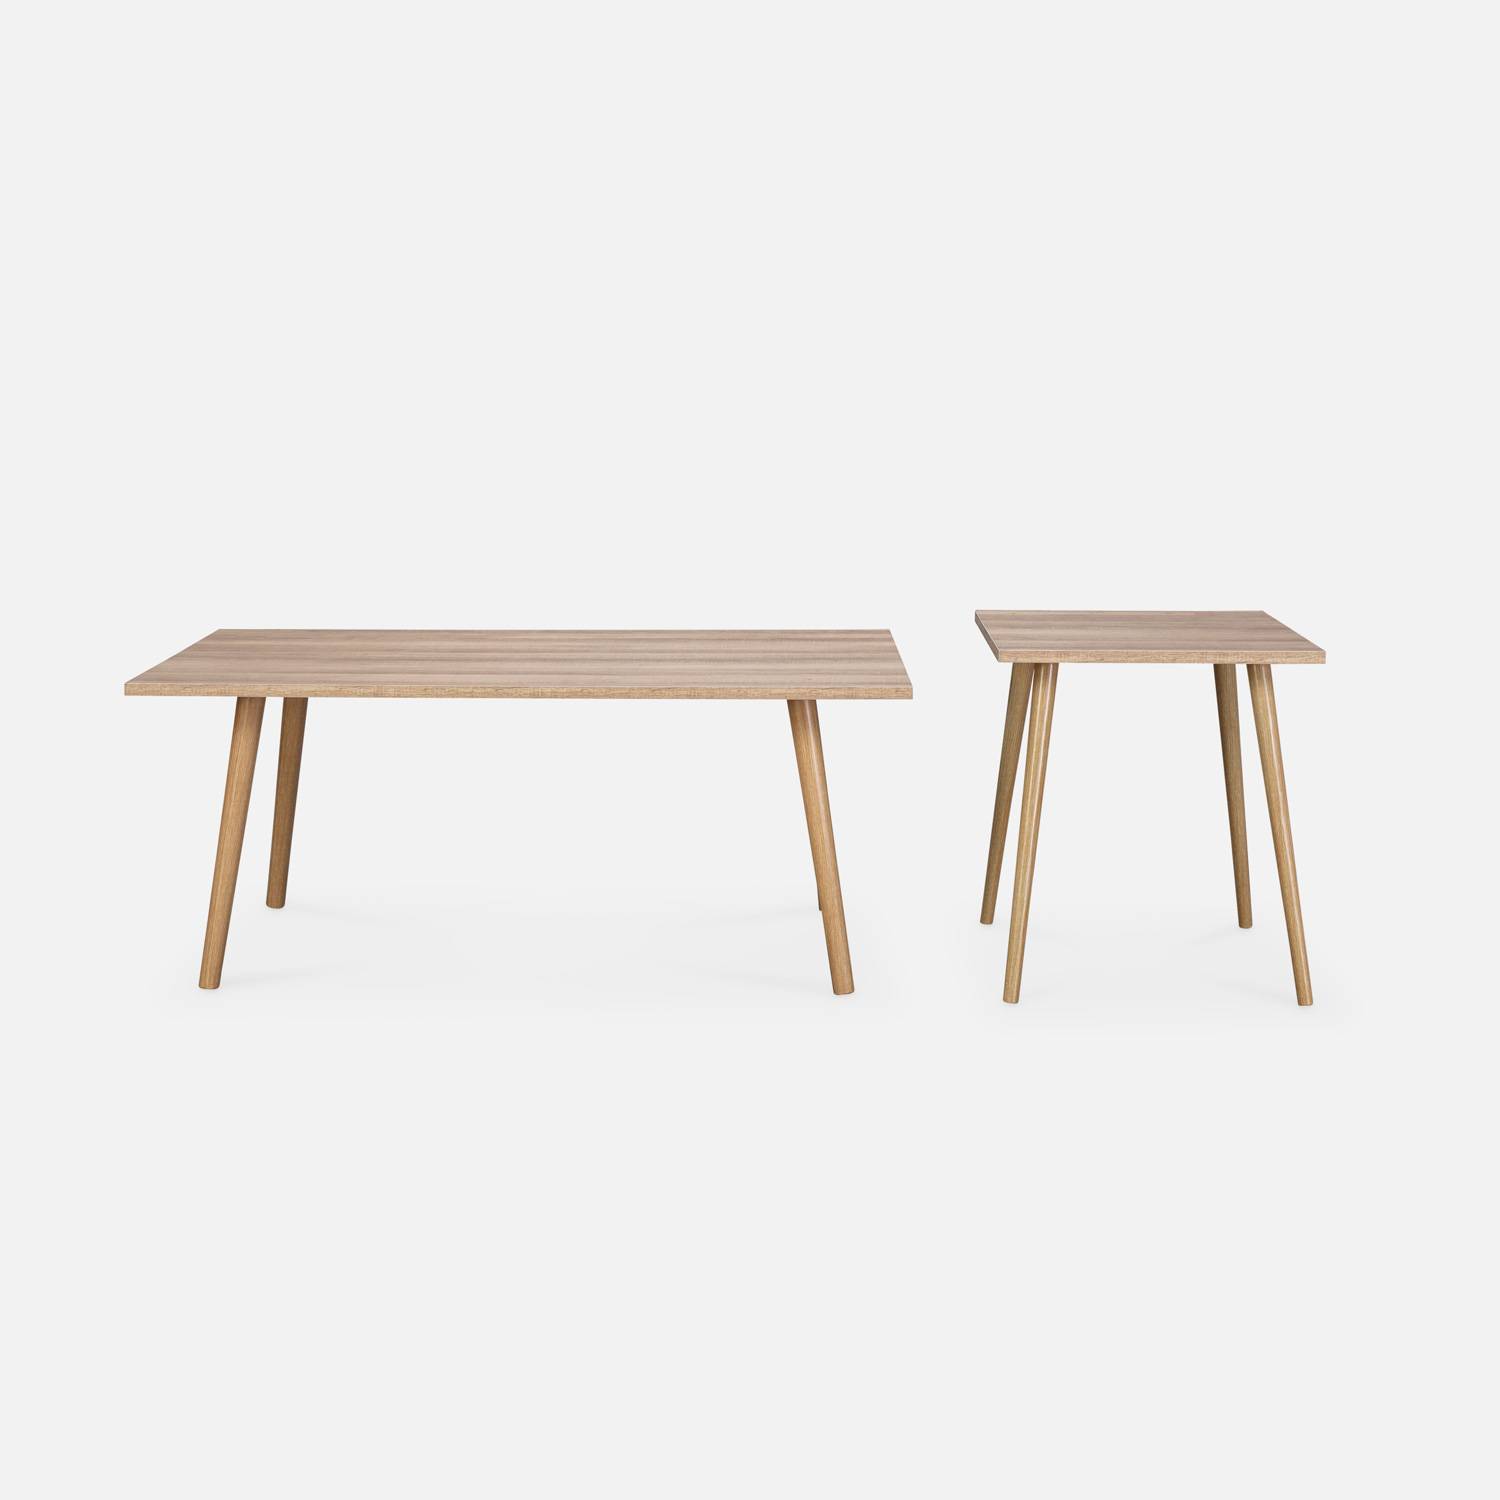 Pair of Scandi-style side tables, 110x59x45.5, 45x45x42.5cm, Scandi, Natural wood colour Photo4